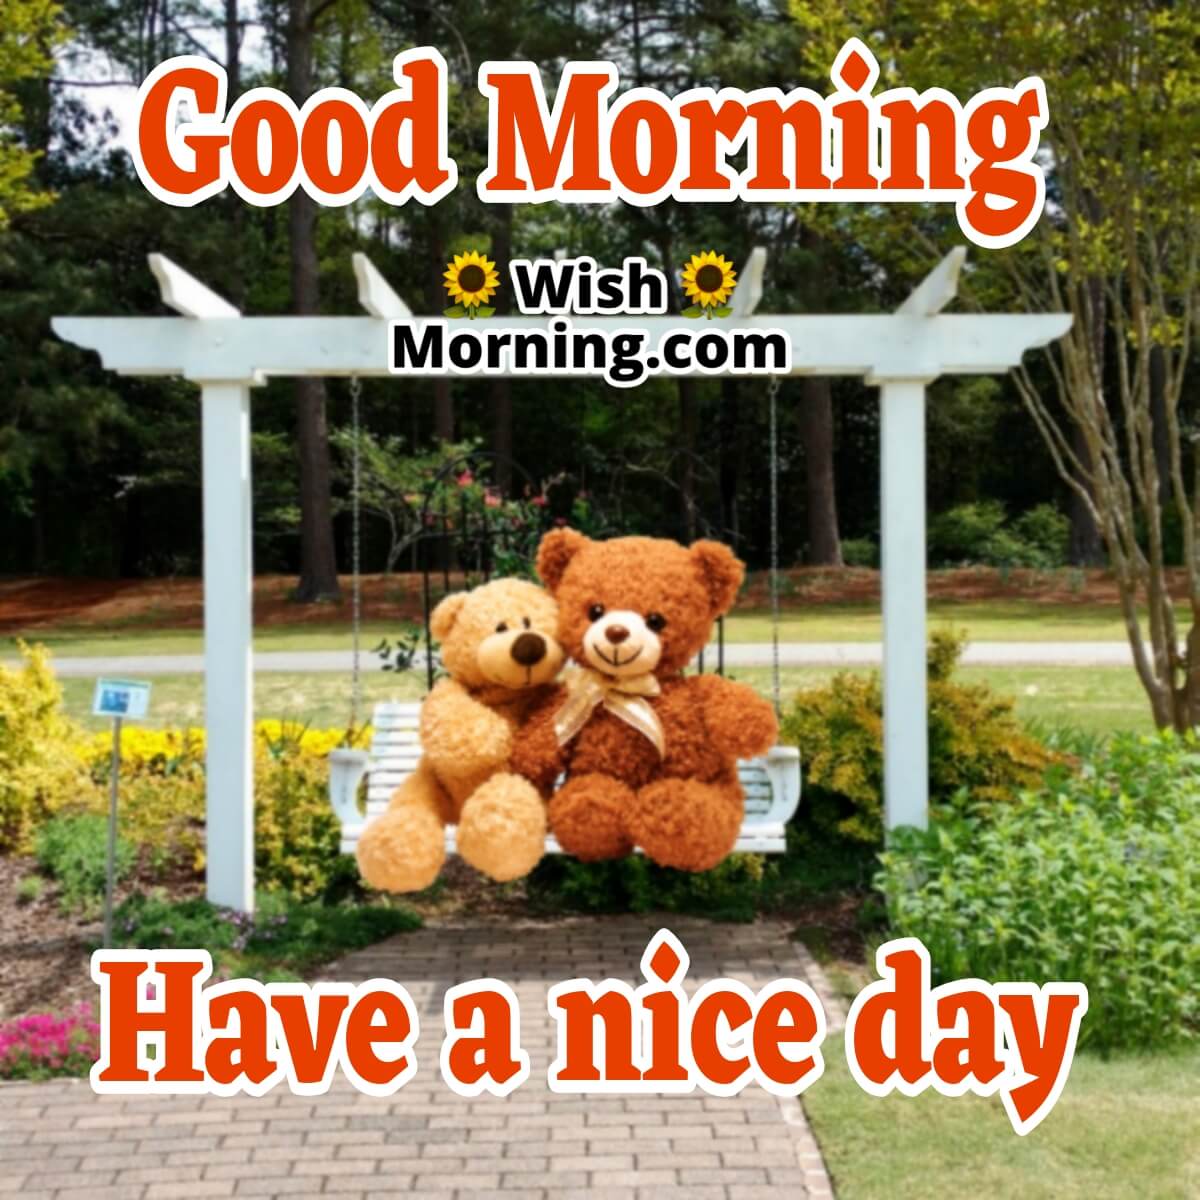 Good Morning Teddy Wishes